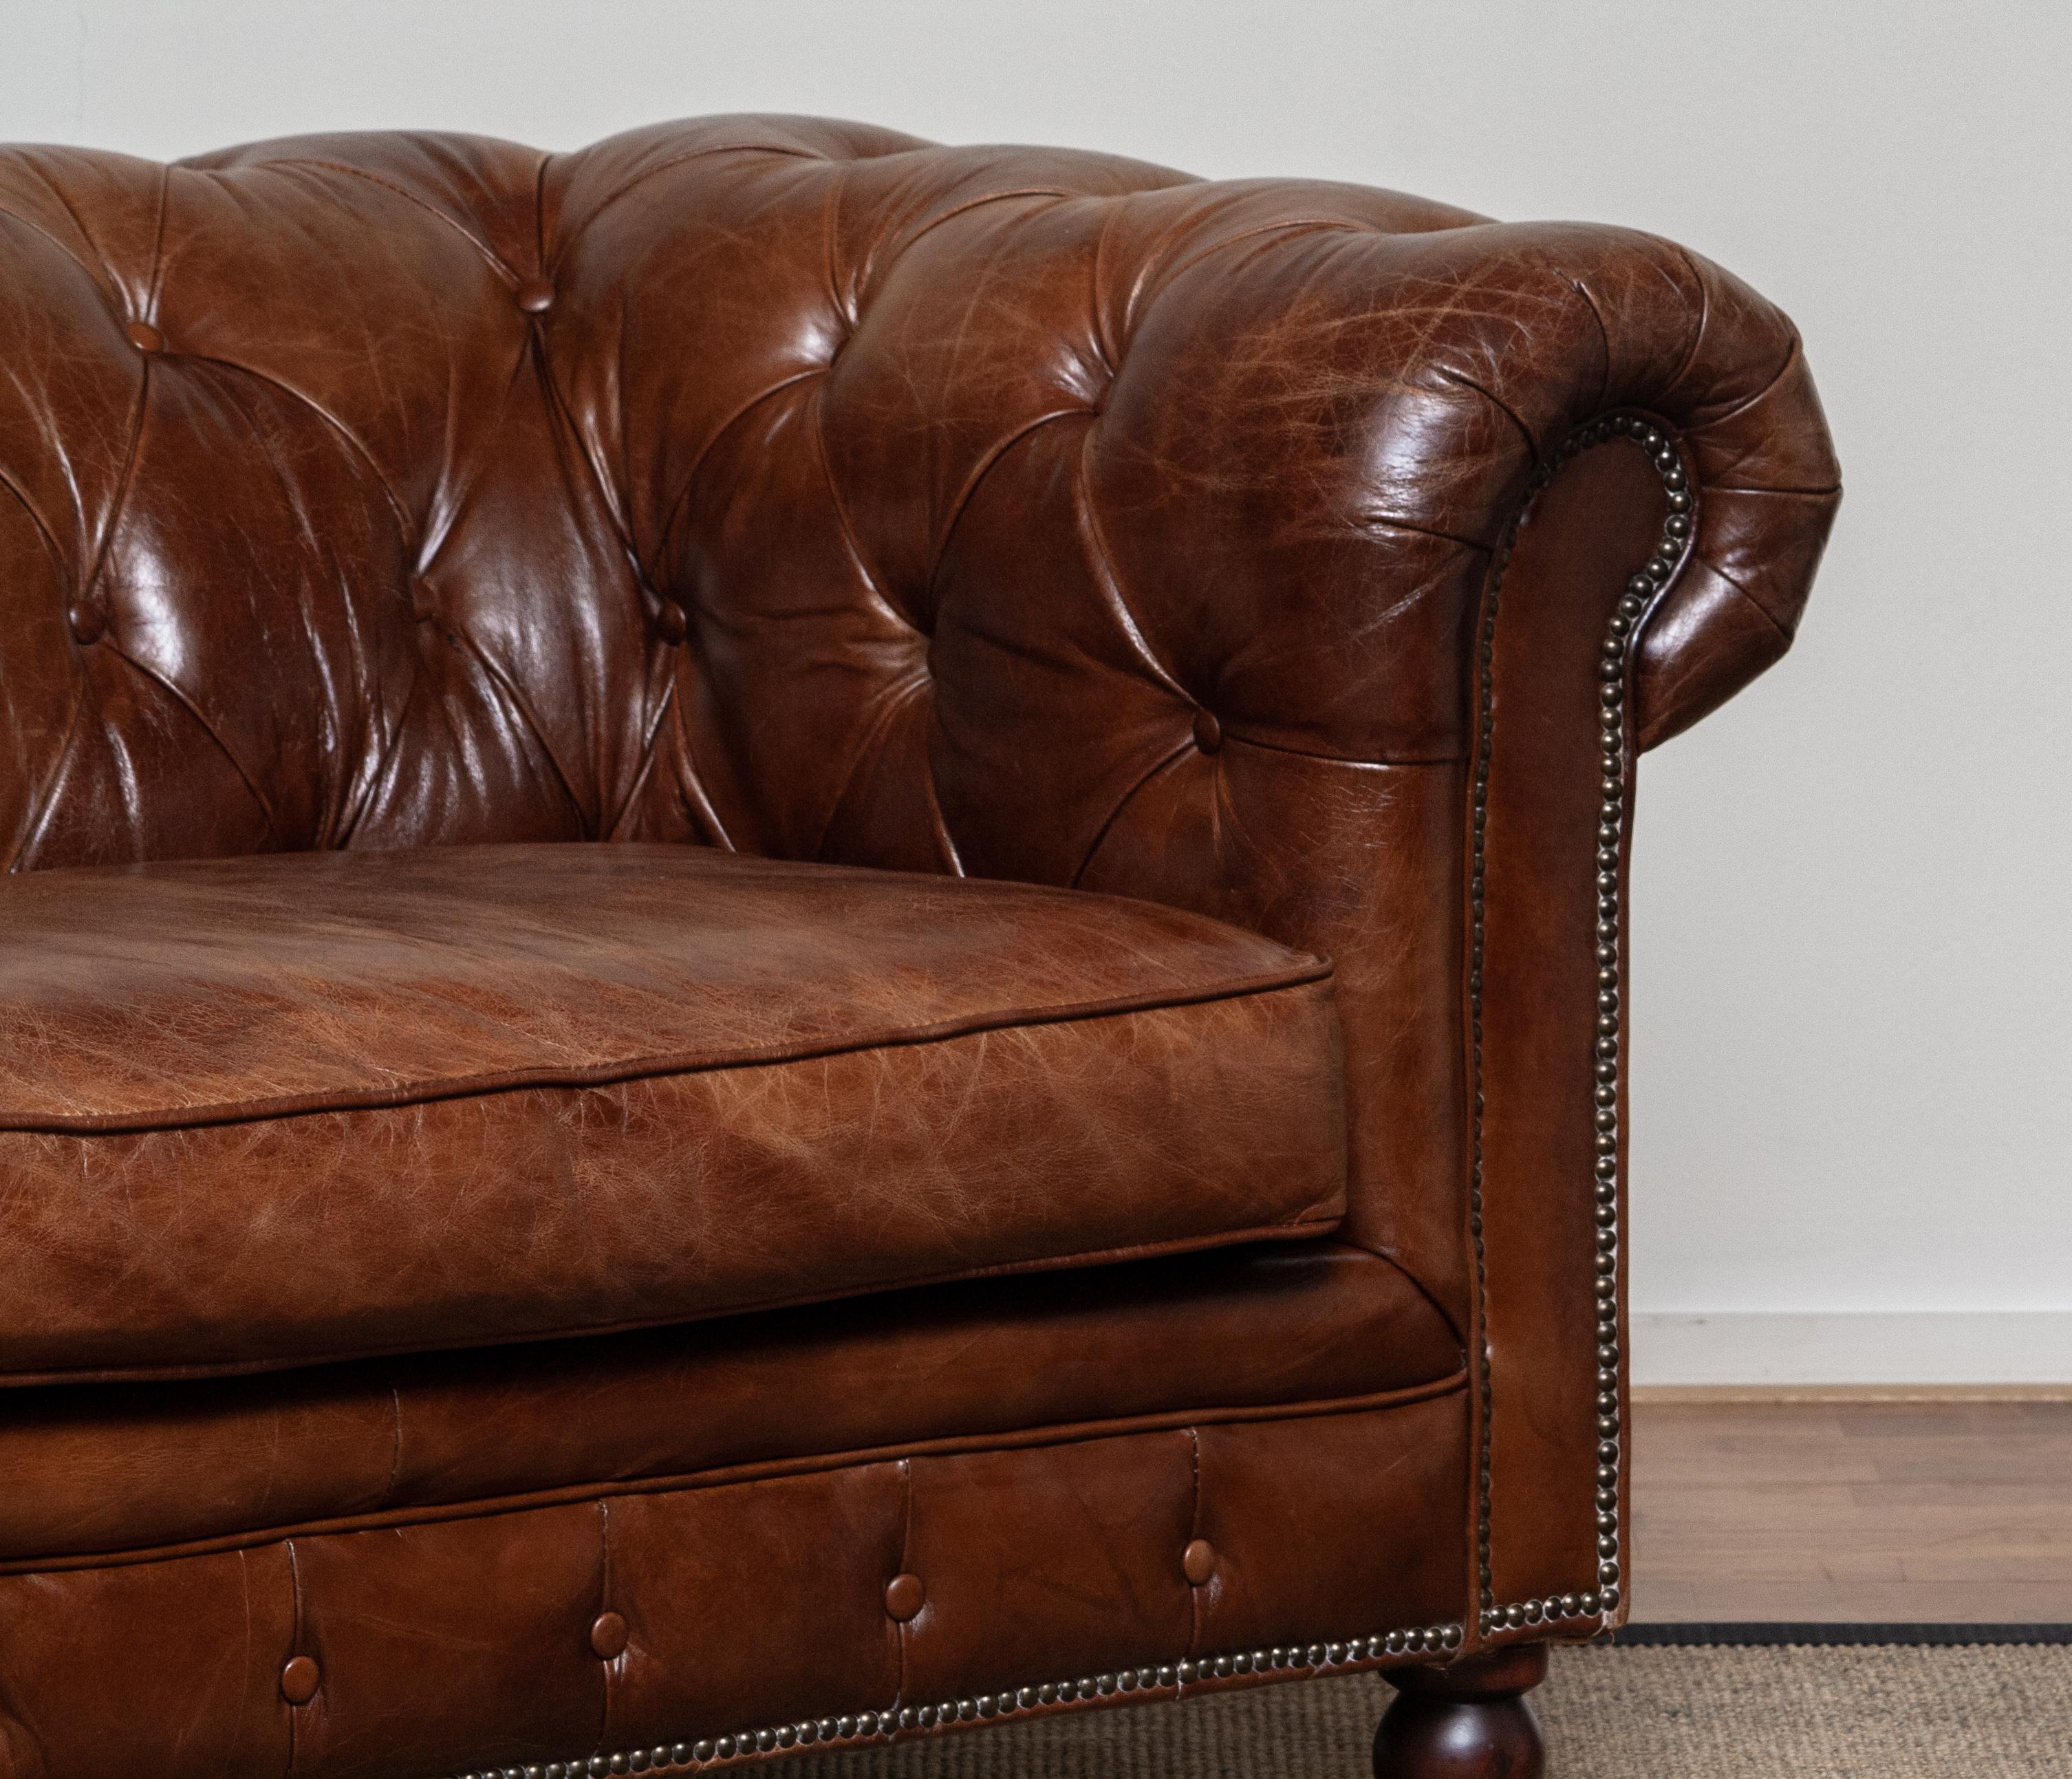 Tufted Brown Leather English Chesterfield Sofa from the 20th Century 1